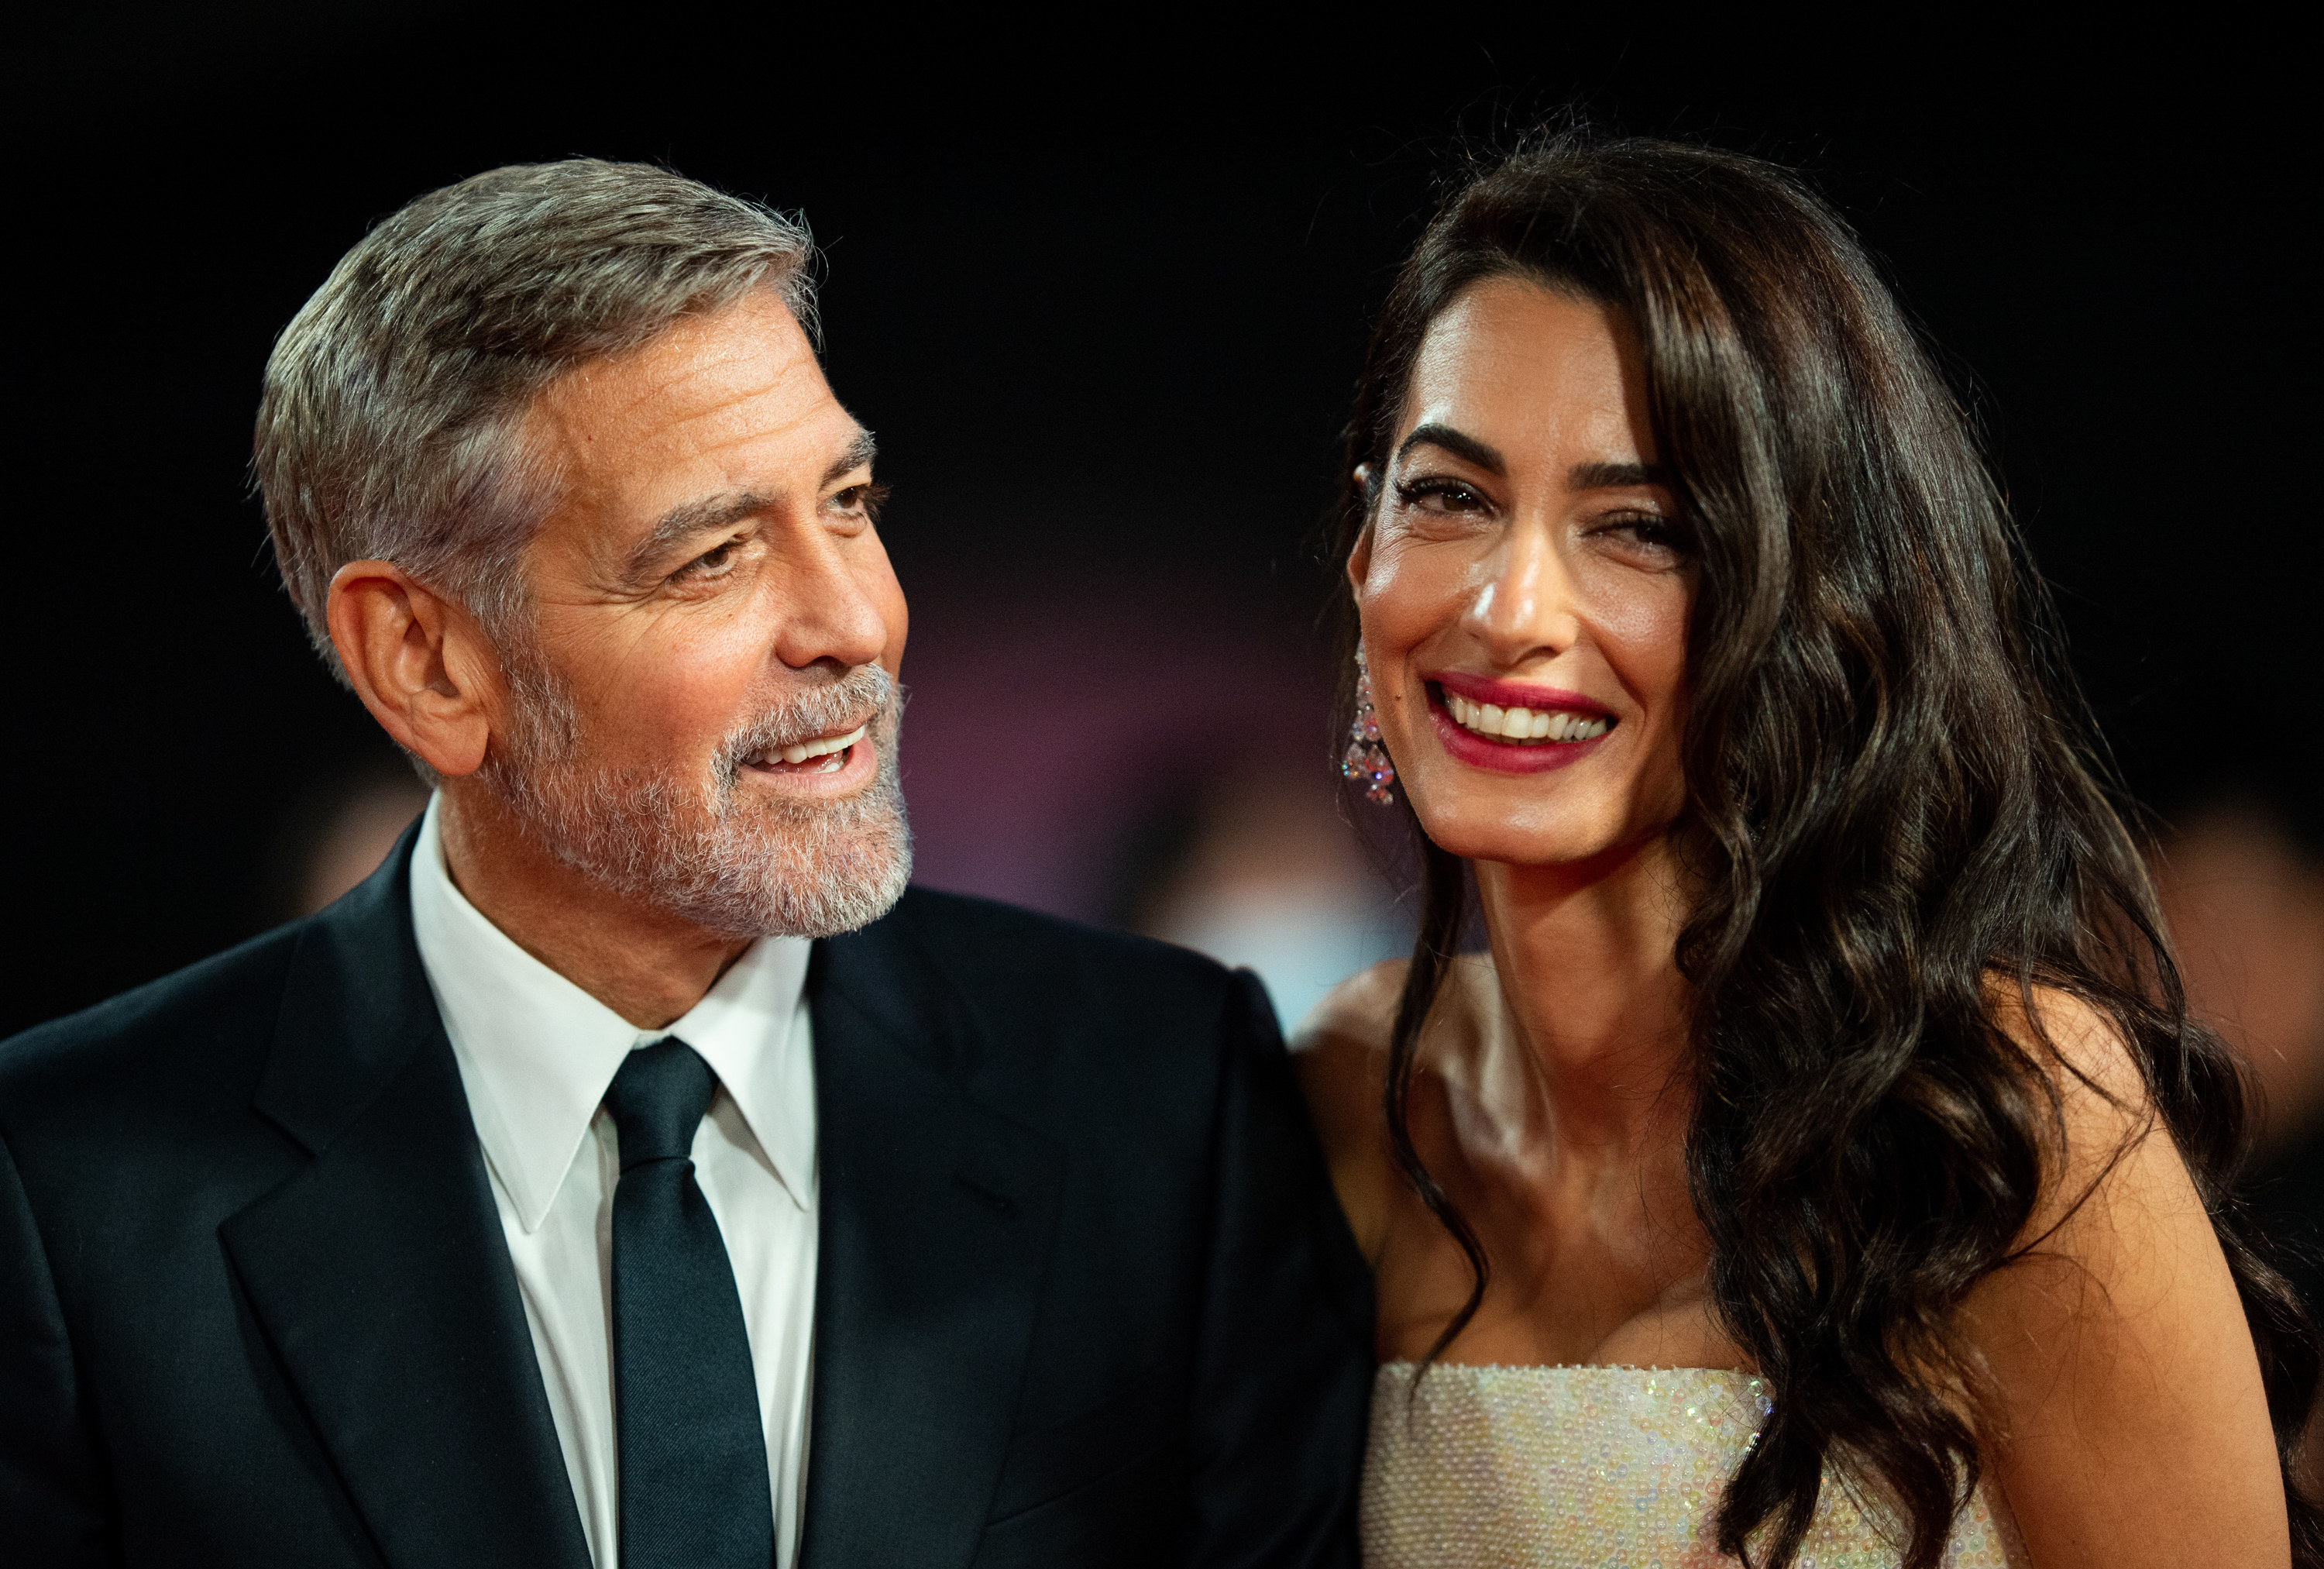 George and Amal Clooney laughing together at an event